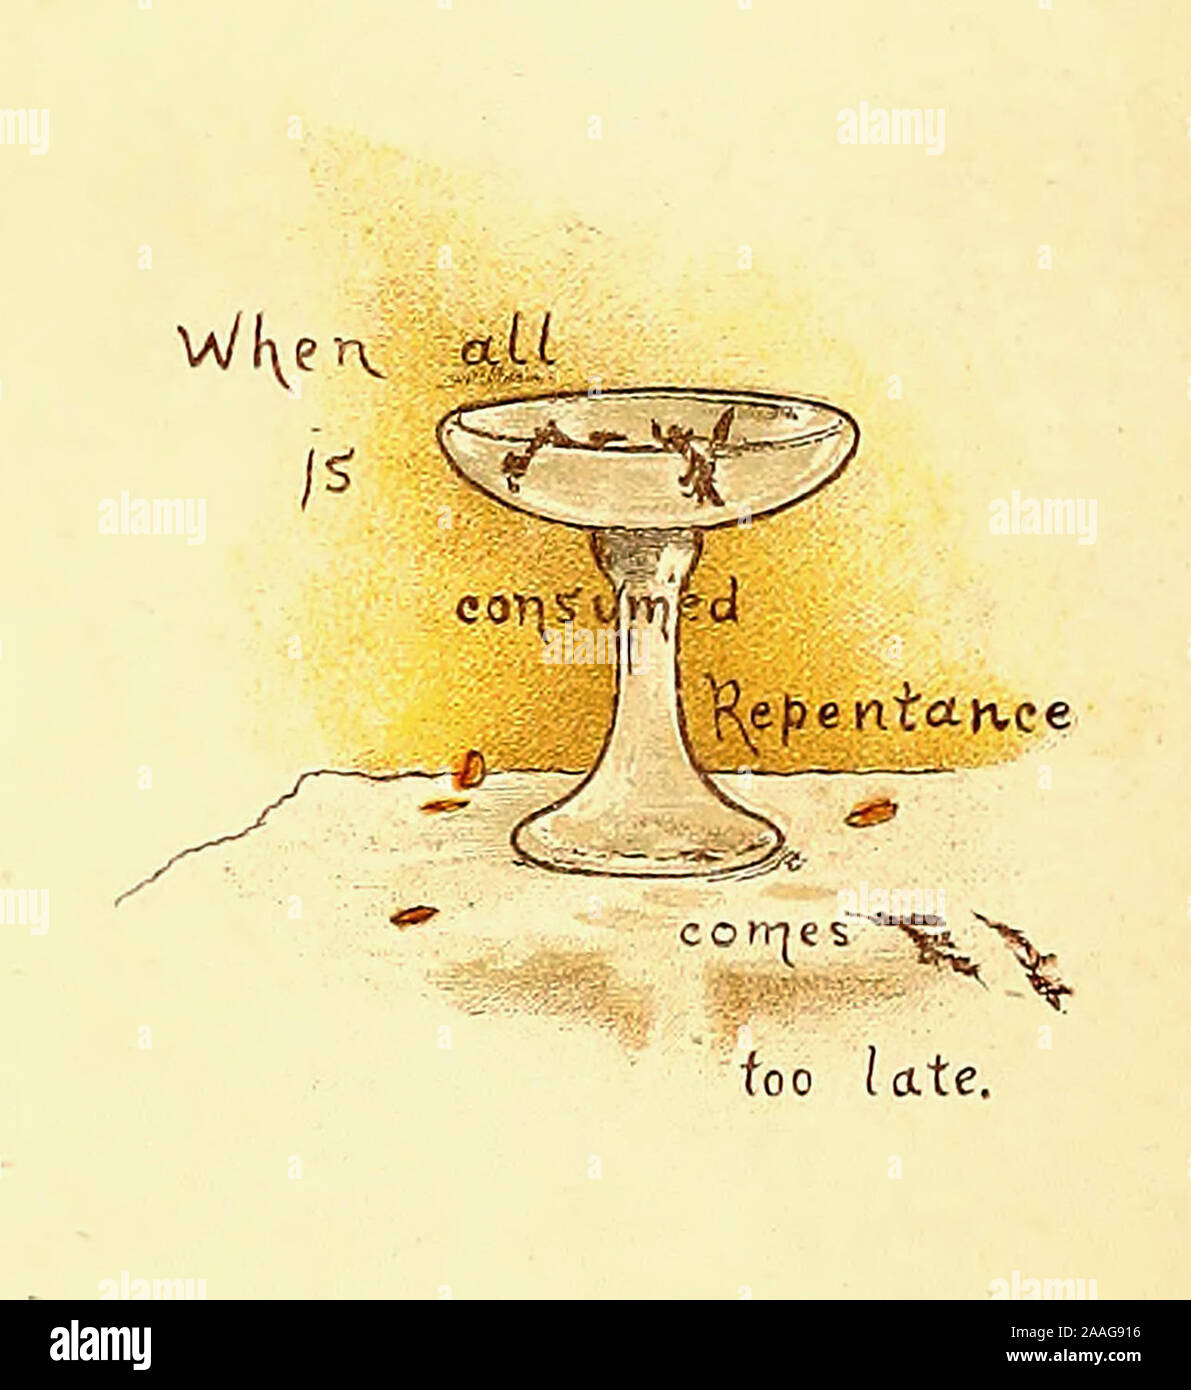 When all is consumed, Repentance comes to late - A Vintage Illustration of an Old Proverb Stock Photo